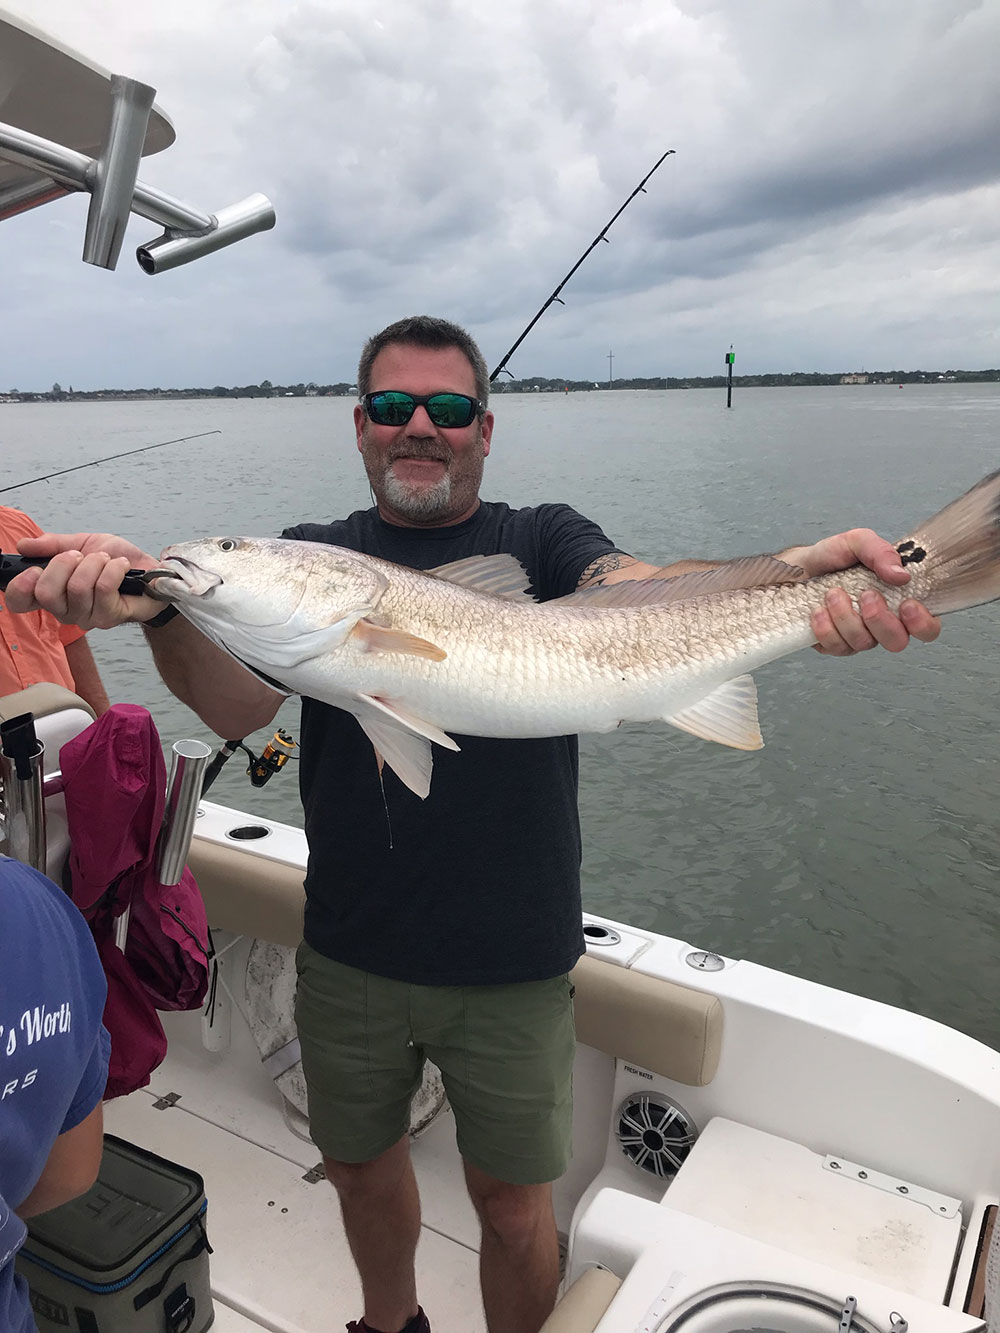 man showcases white and brown fish on the boat